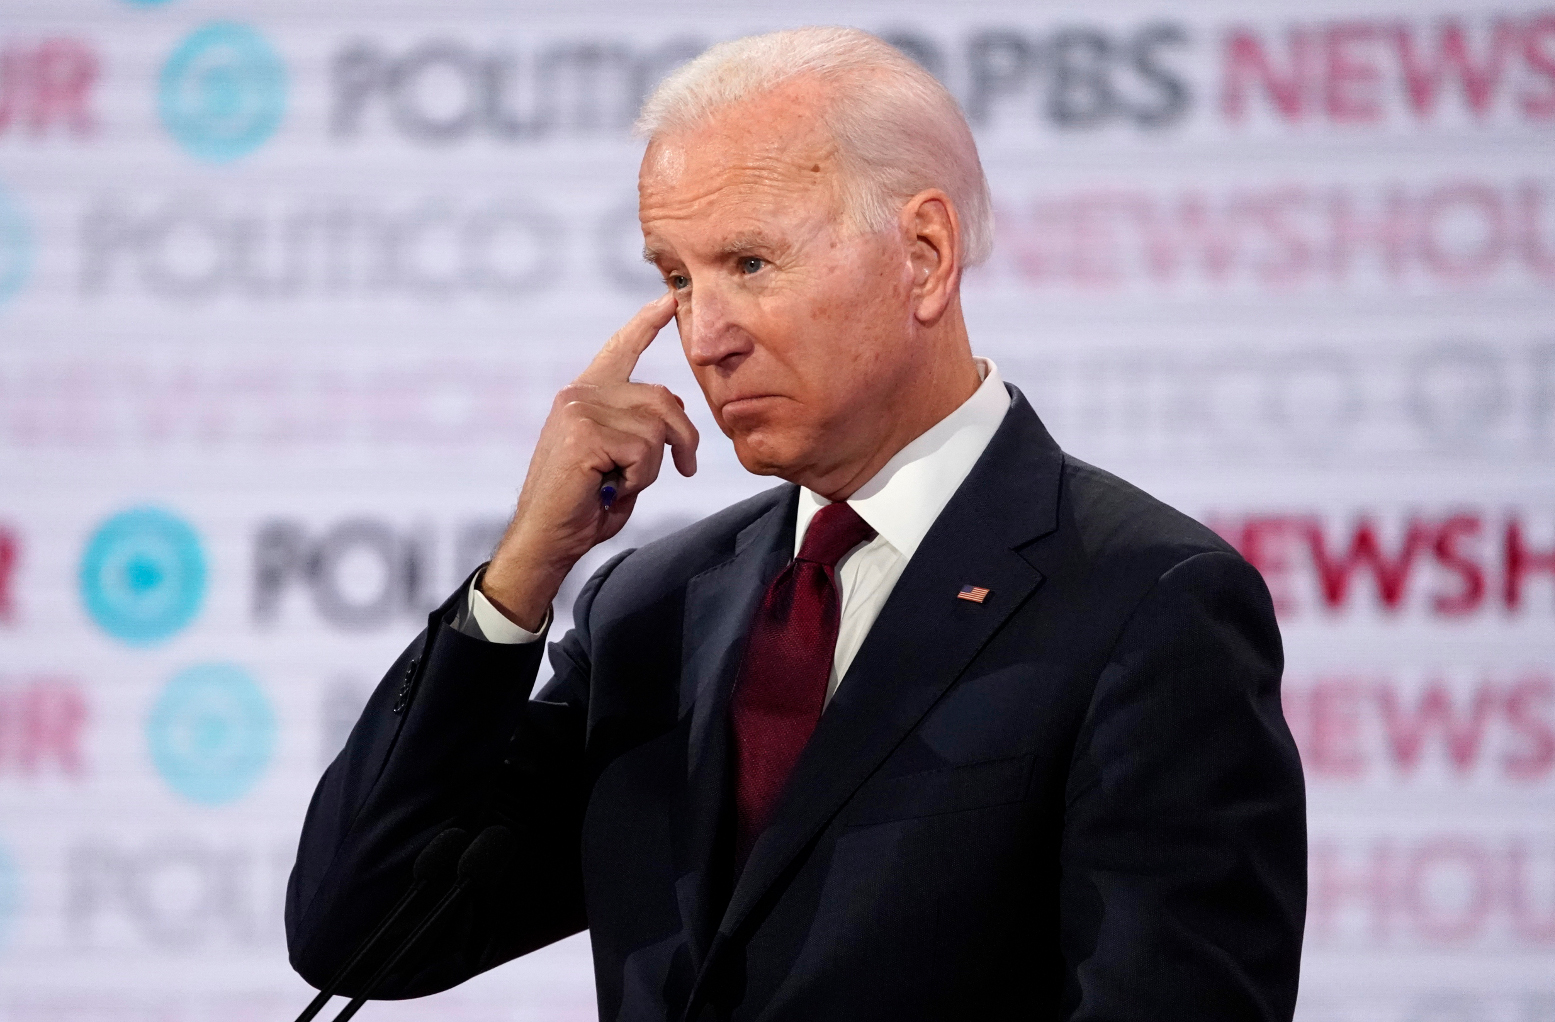 Biden Won't Say If He Plans to Run Again in 2024 'Let's See What